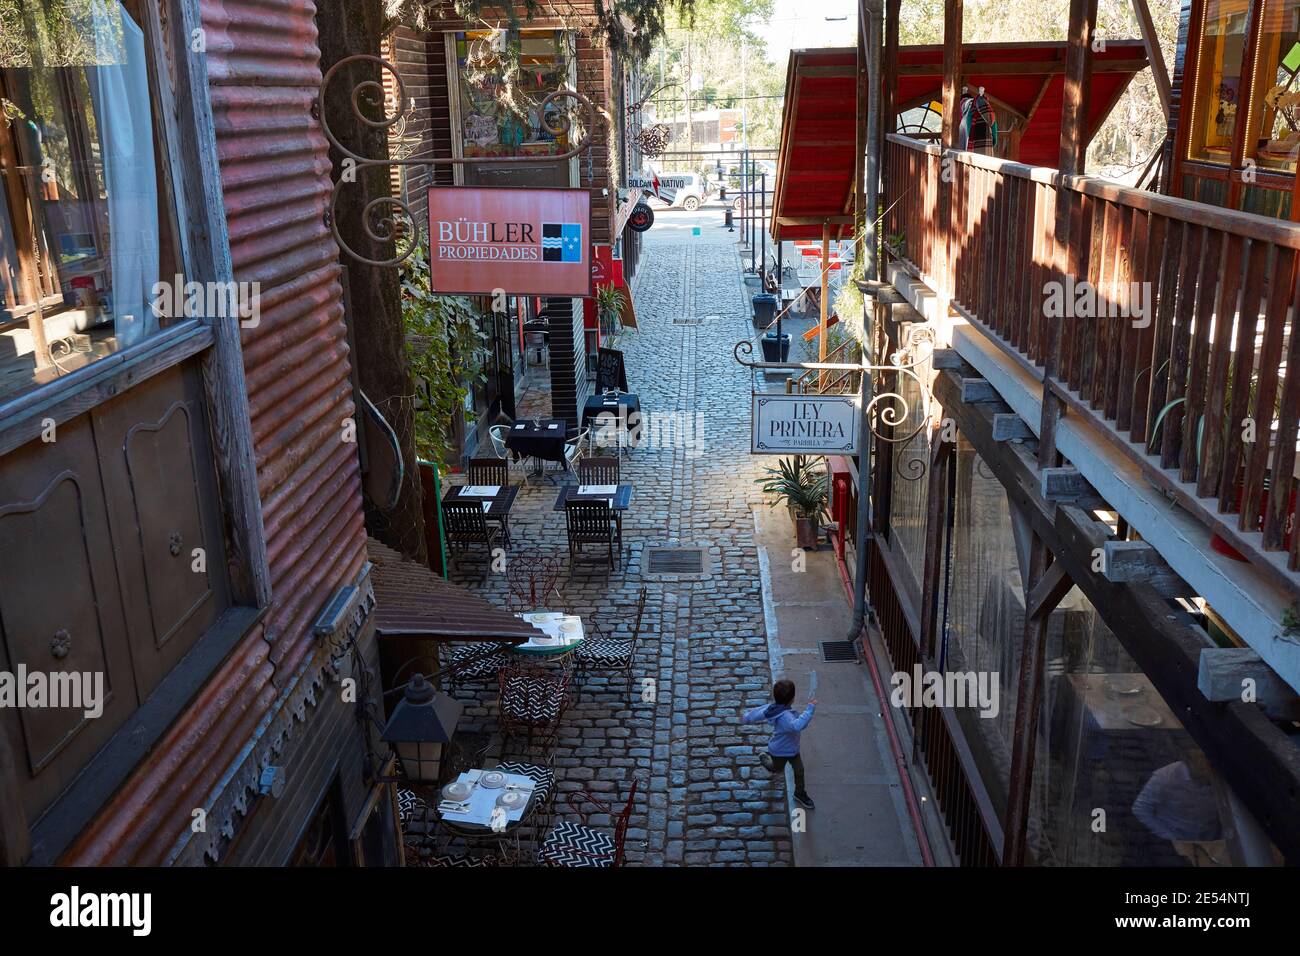 Cobbled road inside the Maschwitz Market, Buenos Aires, Argentina. Stock Photo